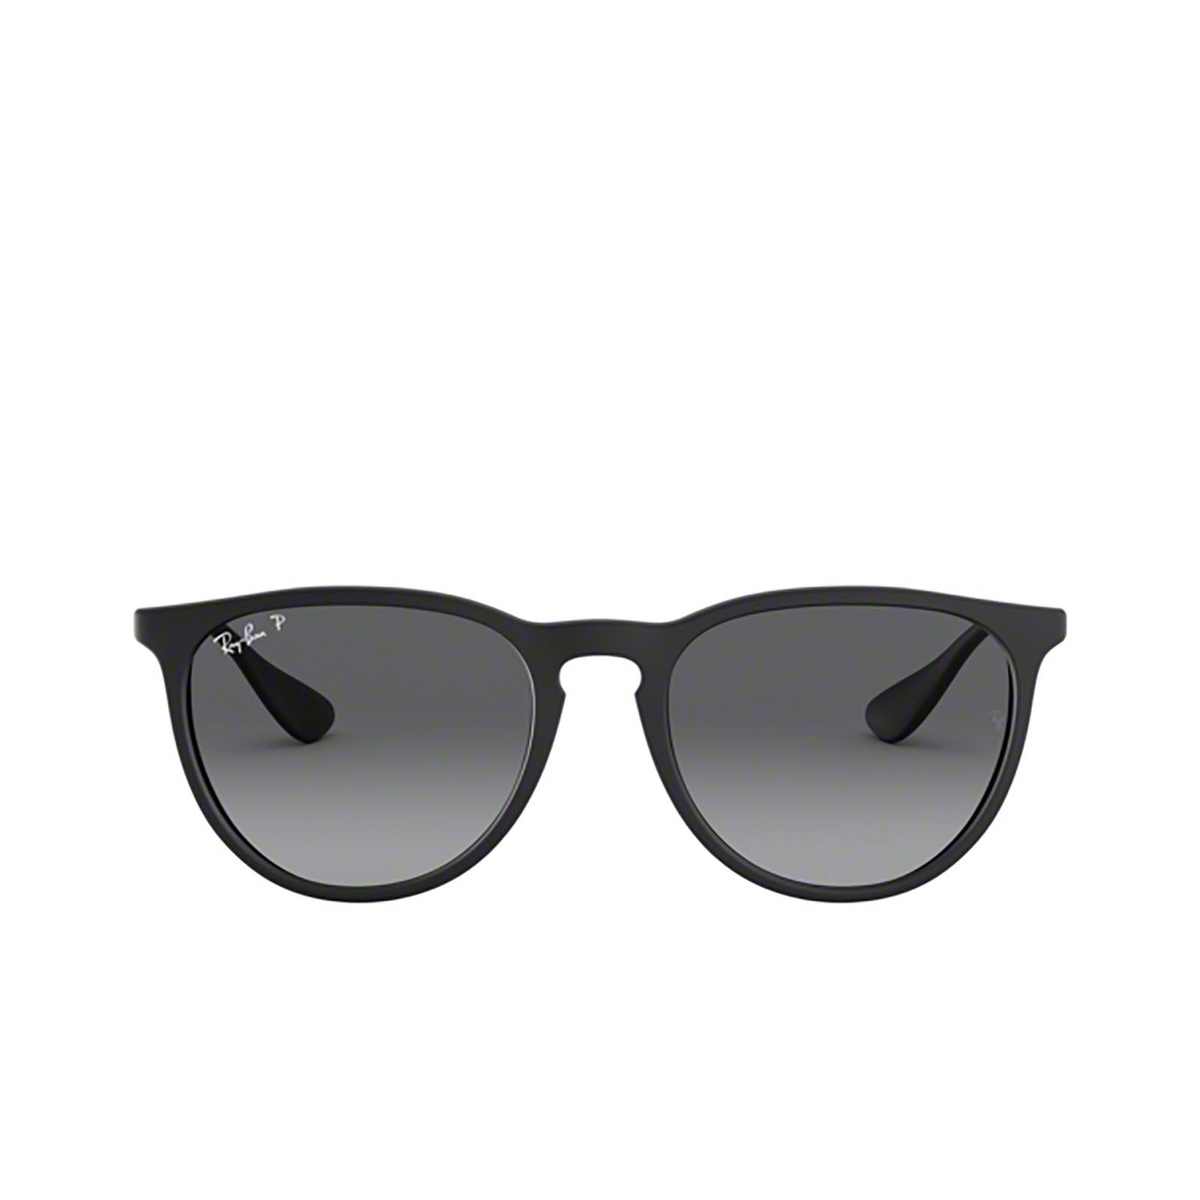 Ray-Ban ERIKA Sunglasses 622/T3 BLACK RUBBER - front view